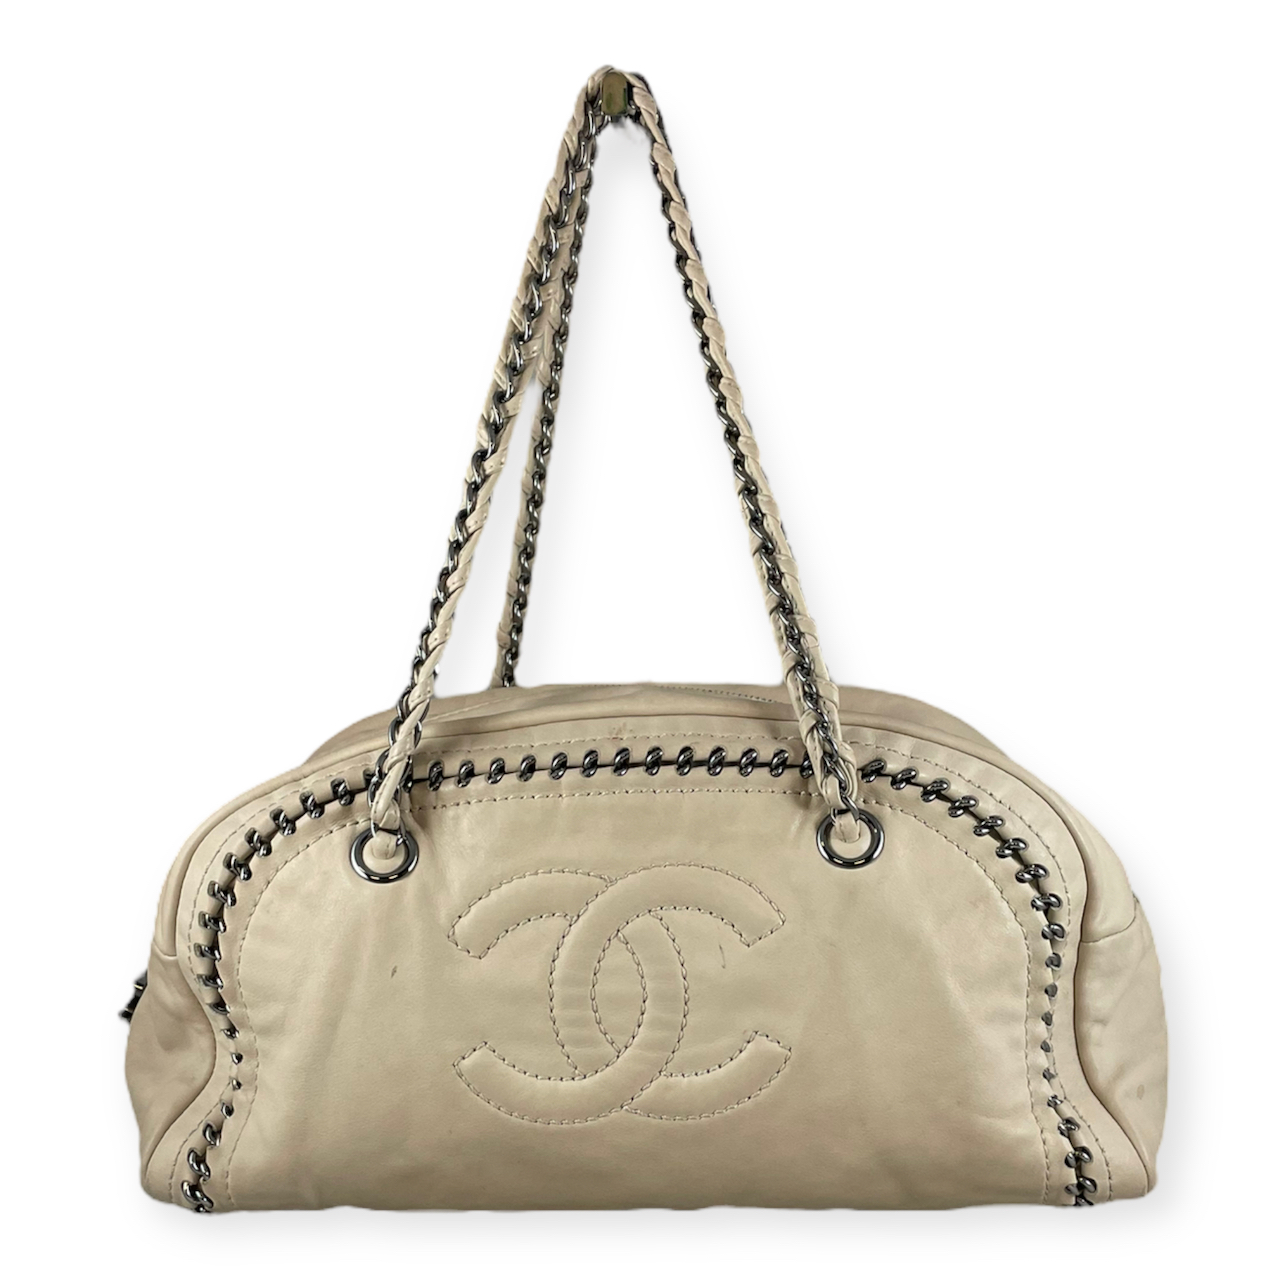 Chanel Luxe Ligne Bowling Bag in Ivory | MTYCI